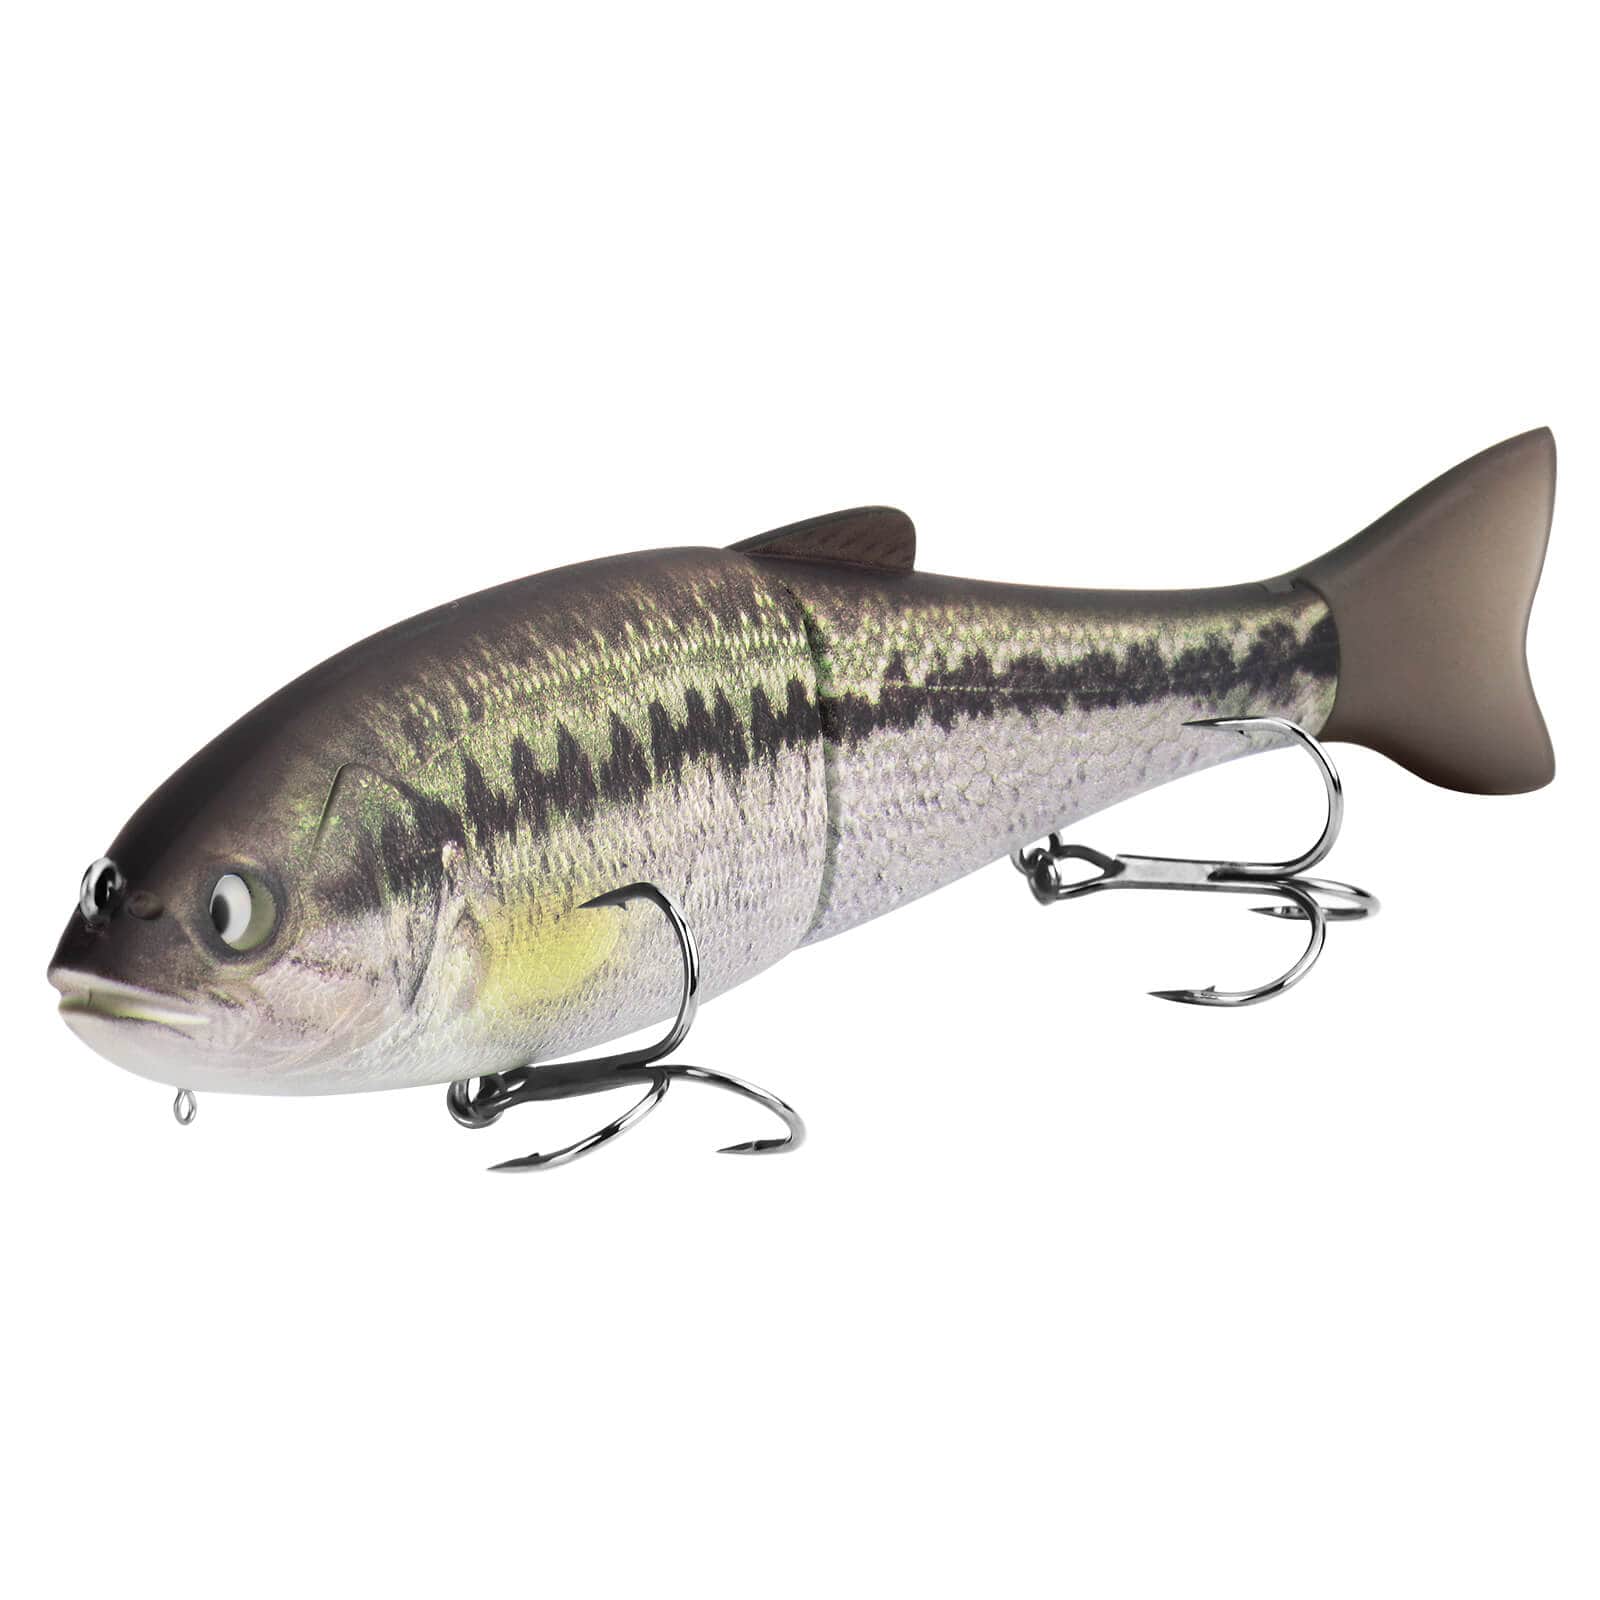 Realistic Wrapped Painted 5 Jointed Swimbaits Fishing Lures